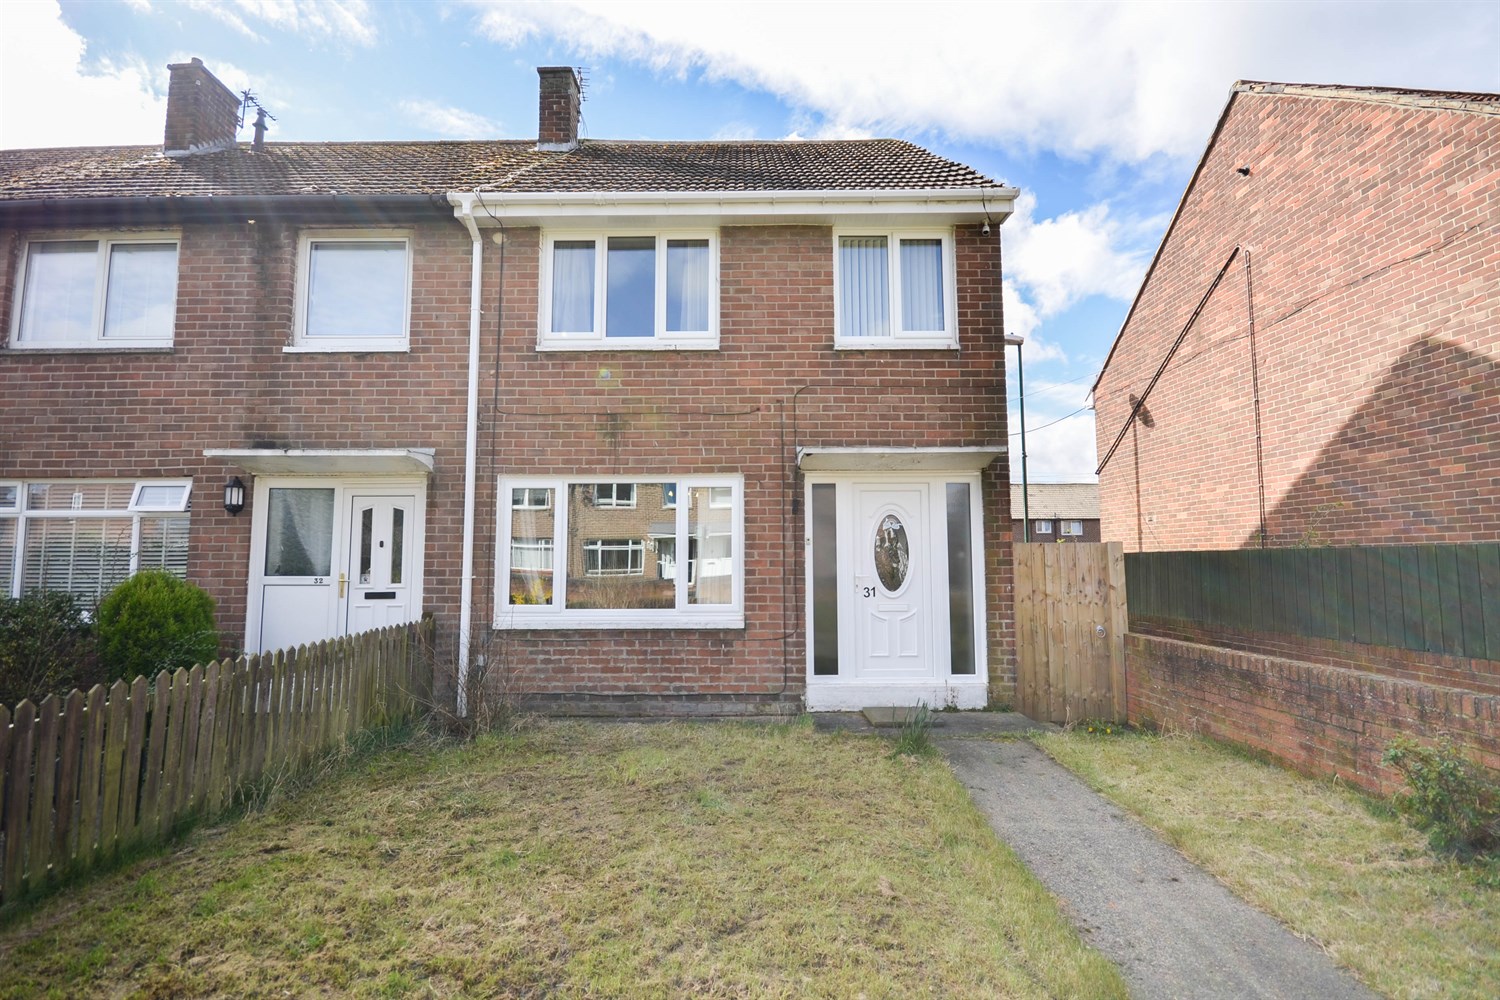 3 bed semi-detached house for sale in Sandiacres, Jarrow - Property Image 1